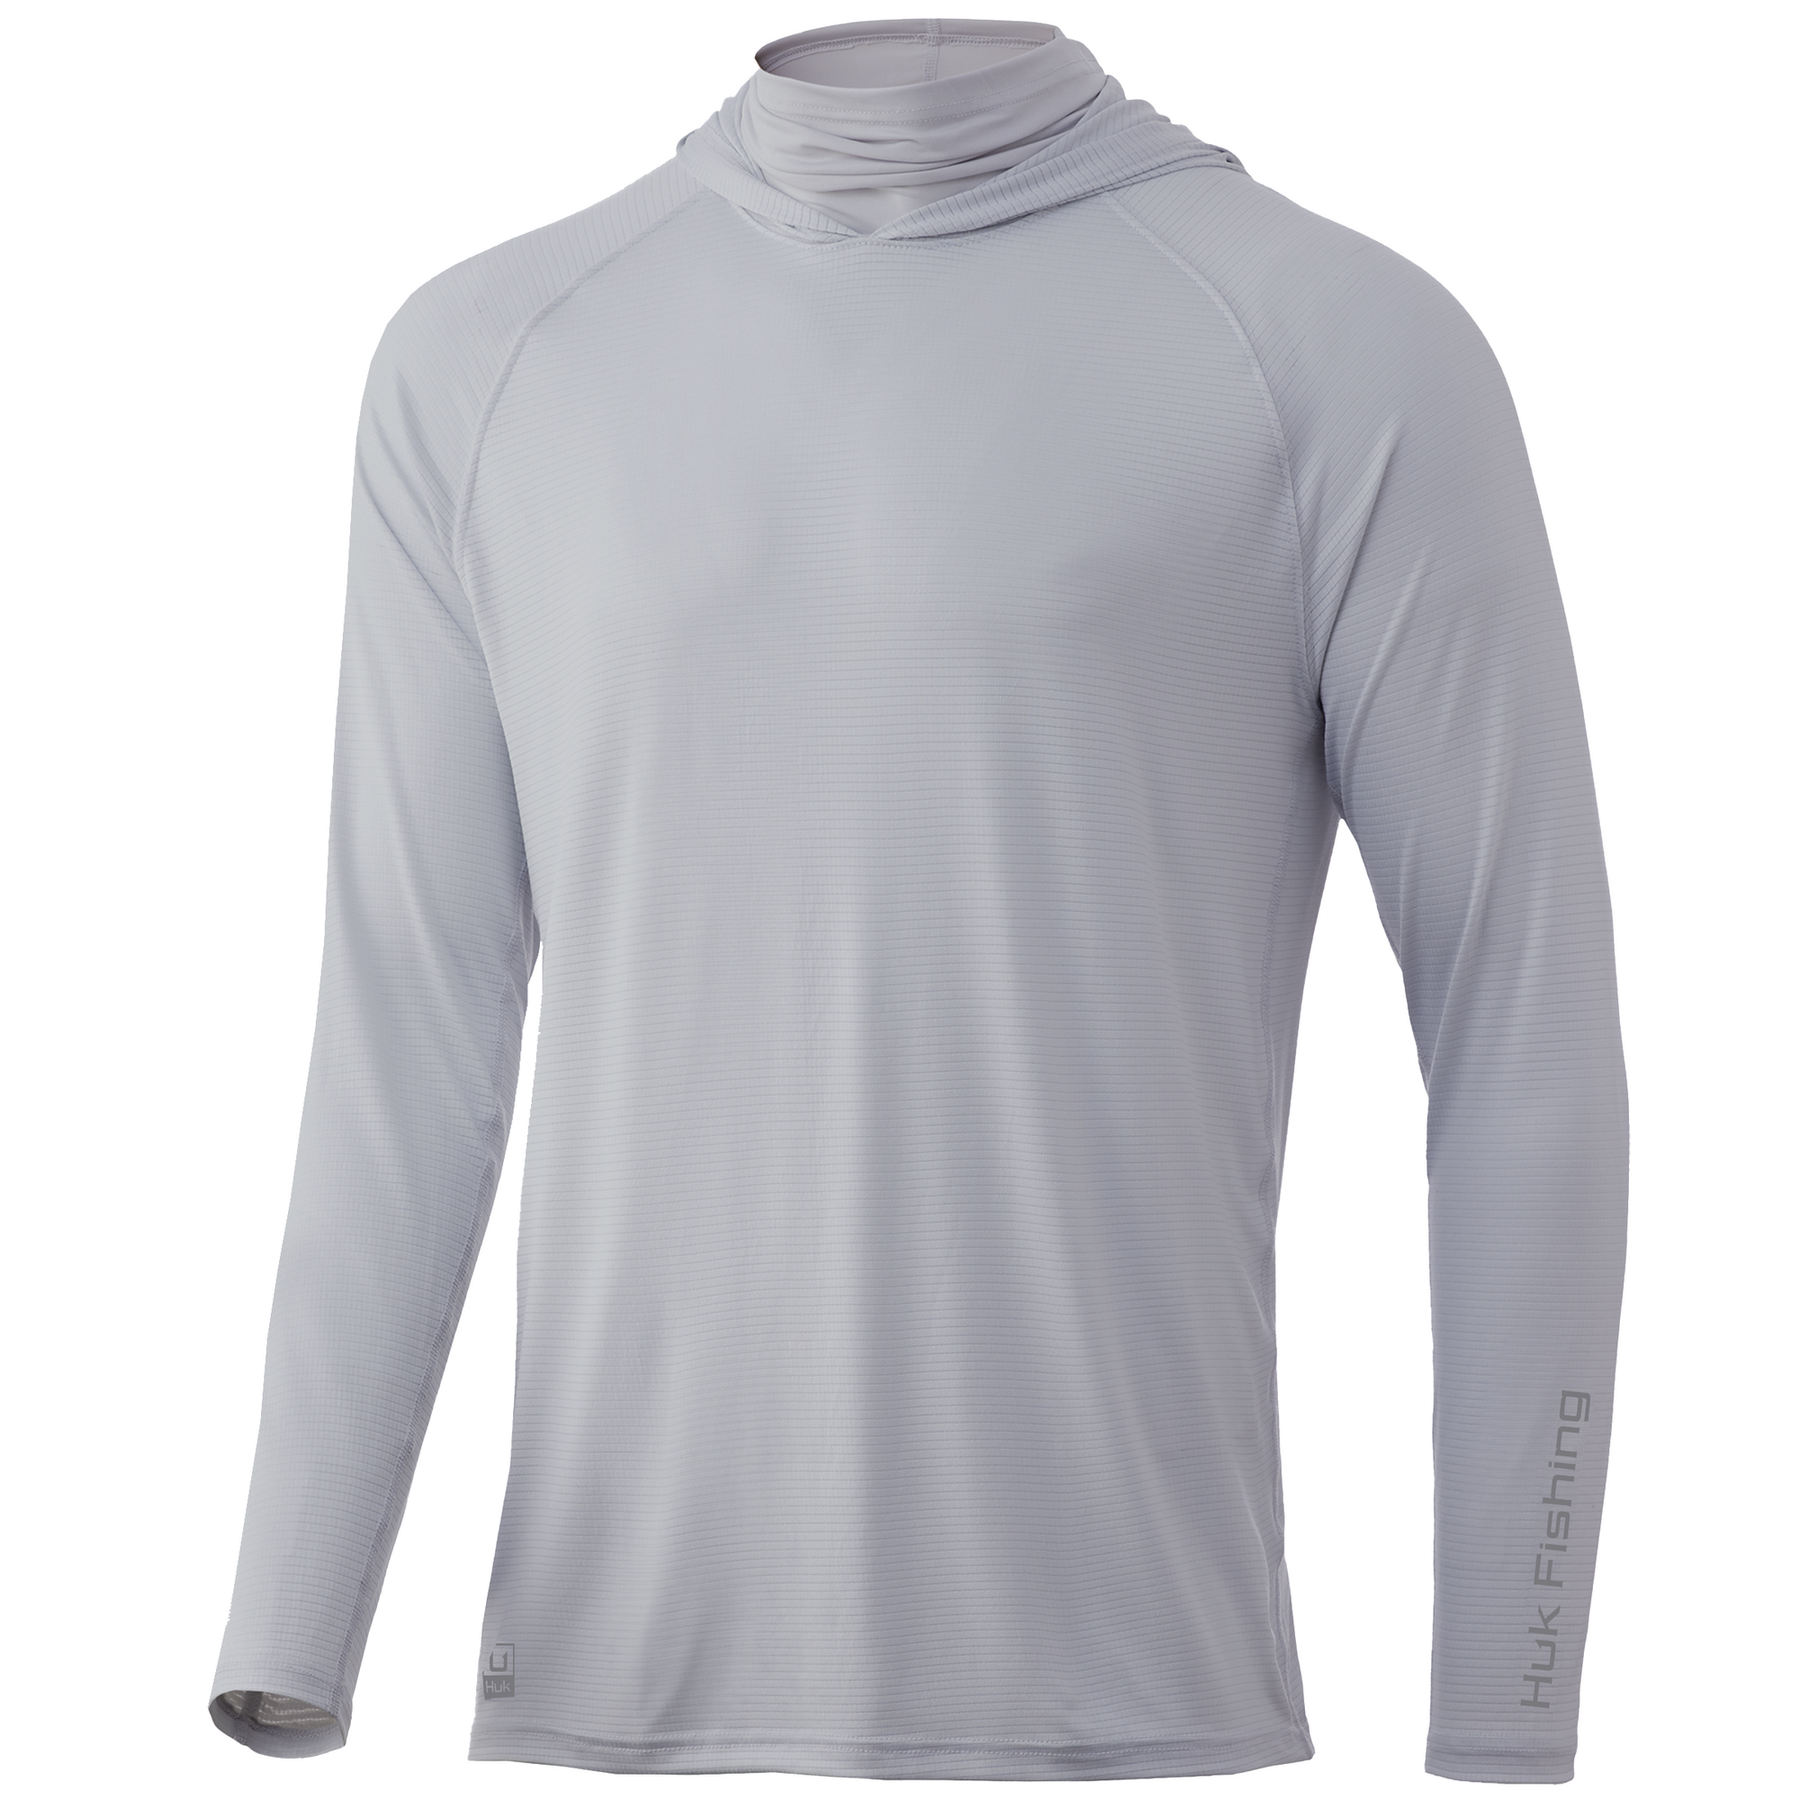 HUK A1A Performance Hoodie - Harbor Mist